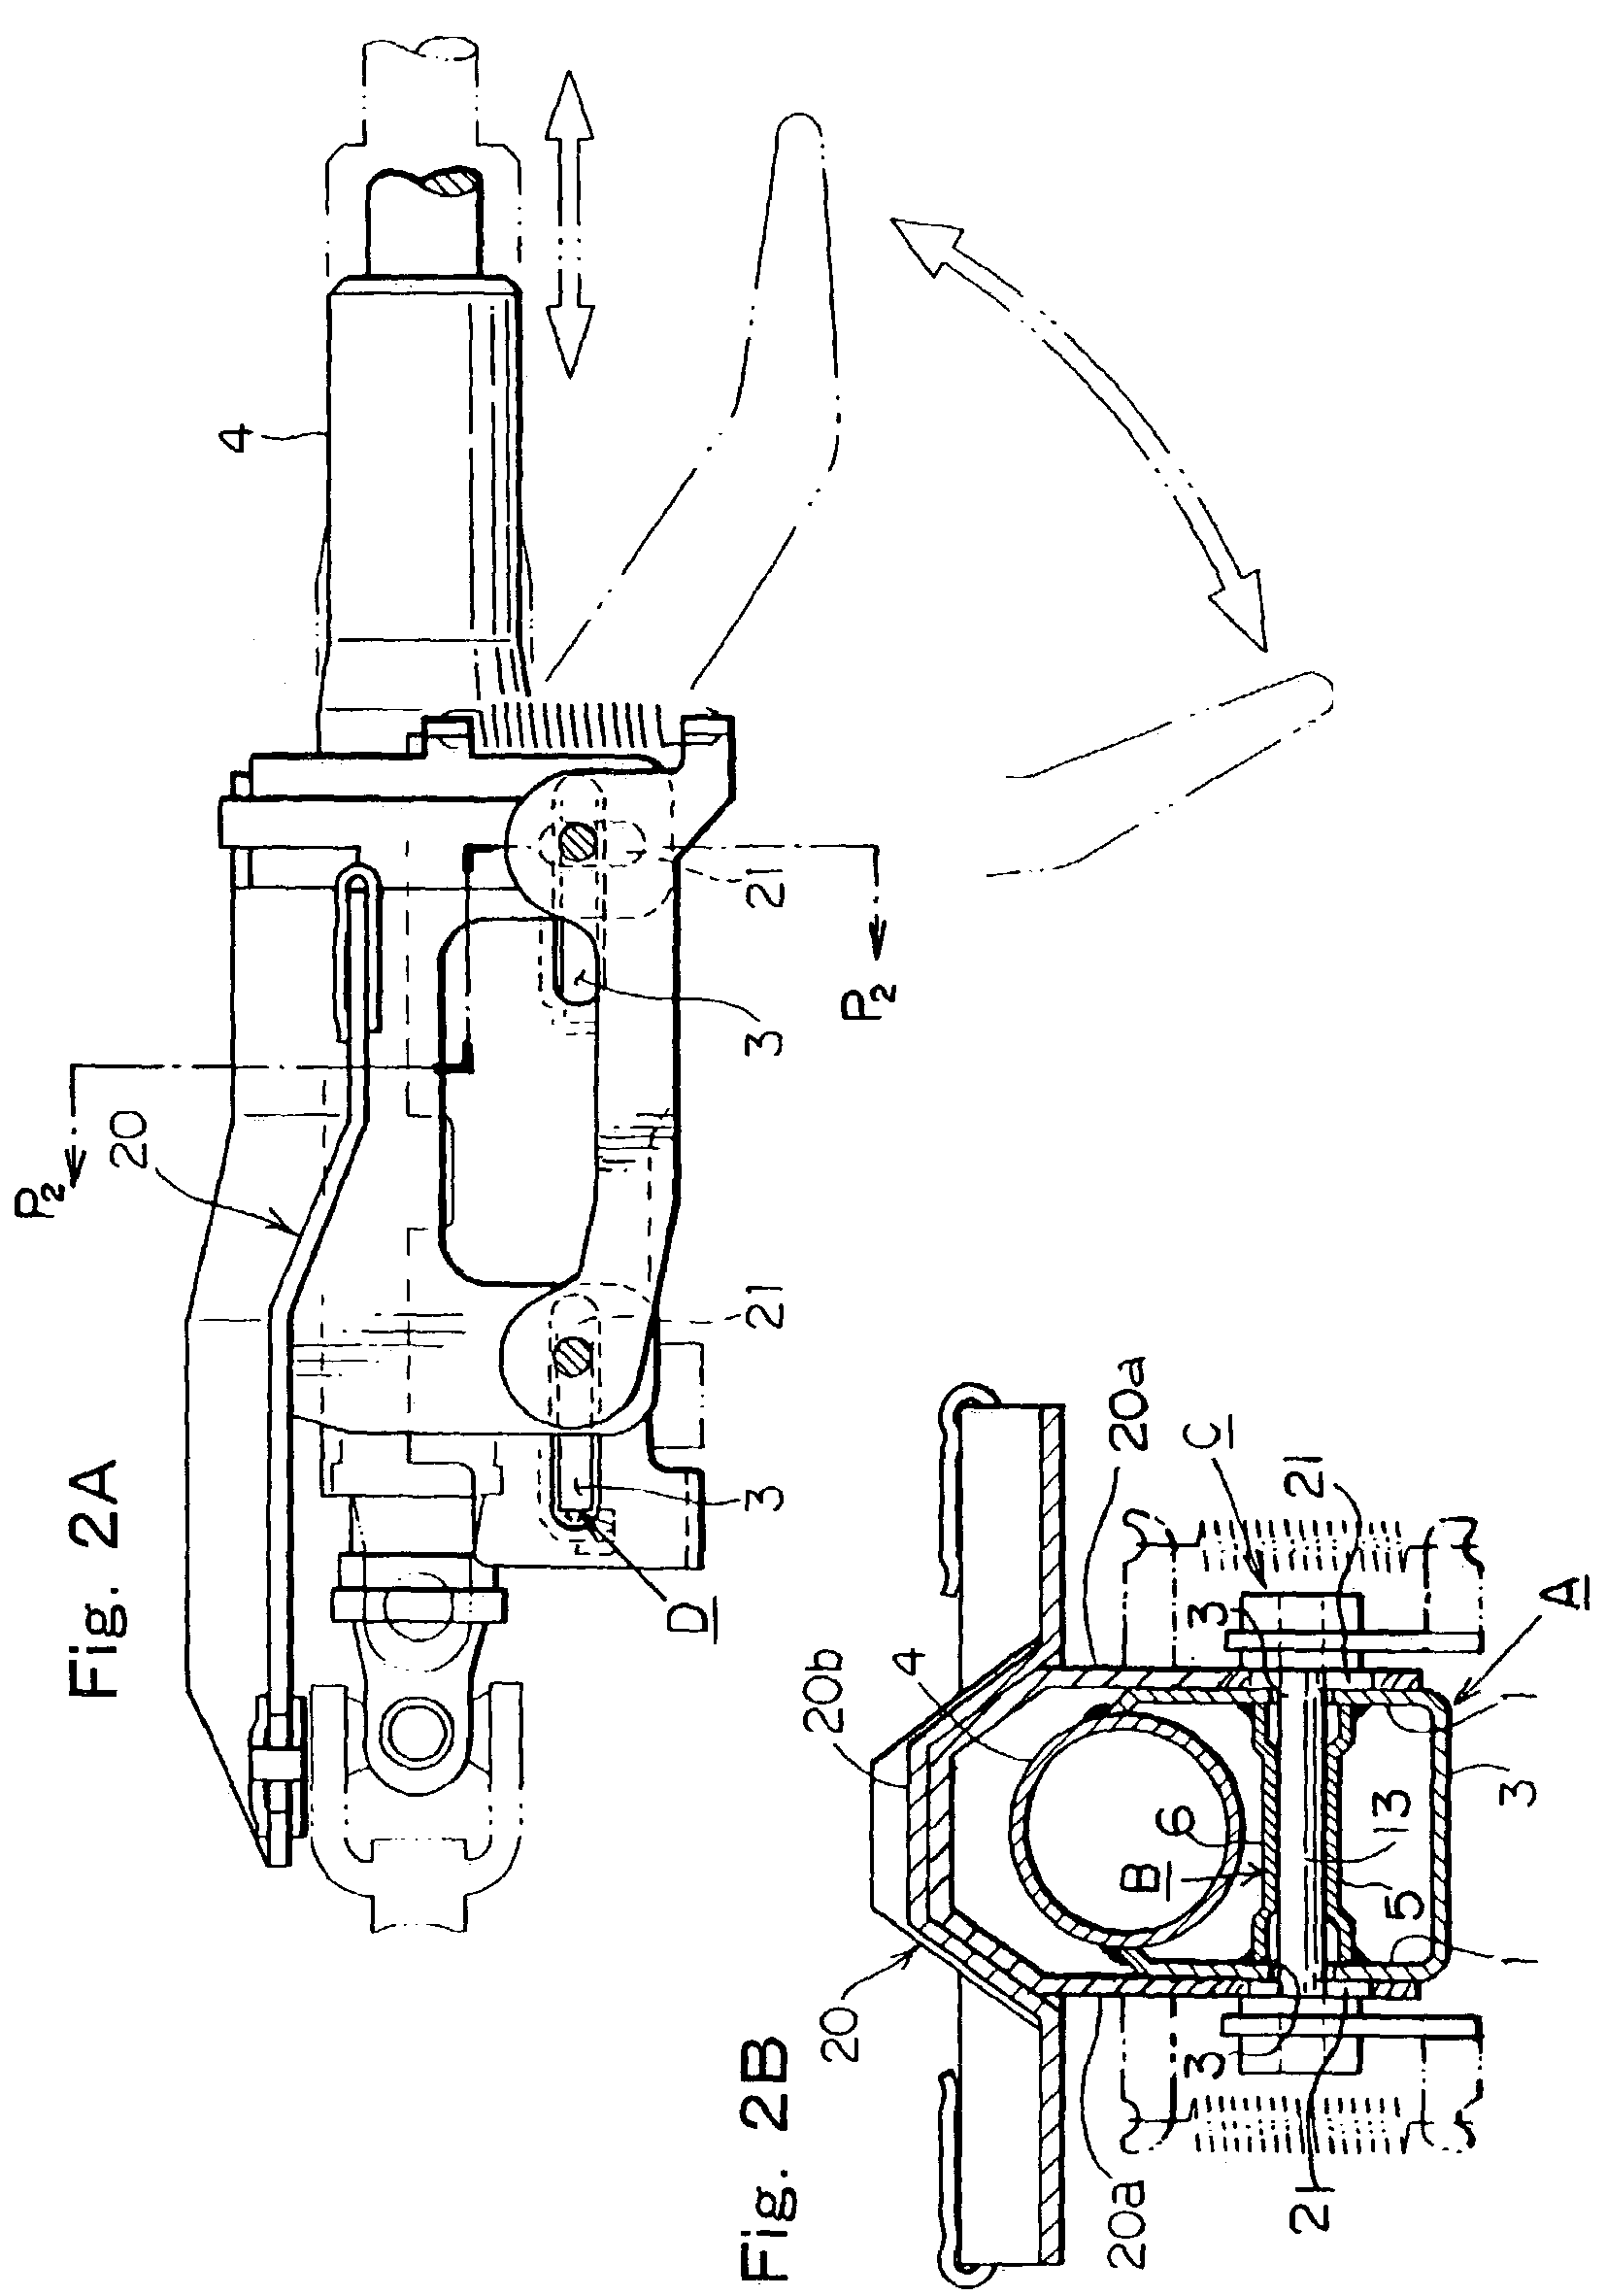 Position adjustment device for steering handle